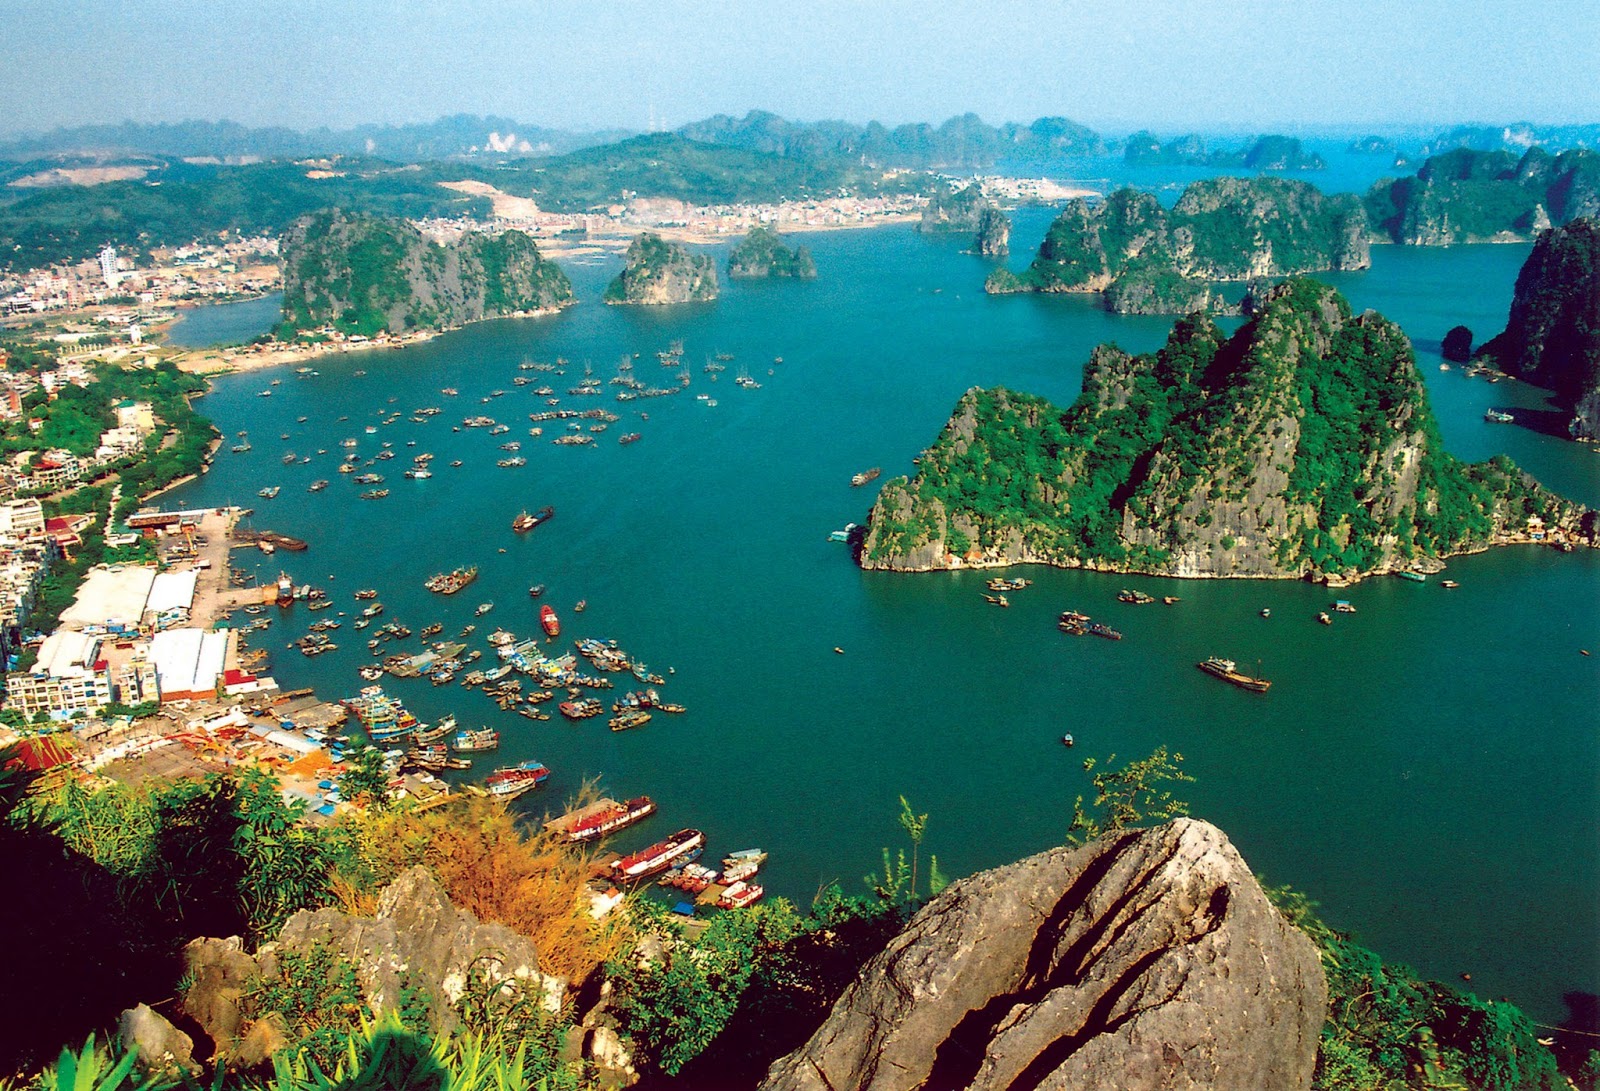 would you like and visit our country vietnam